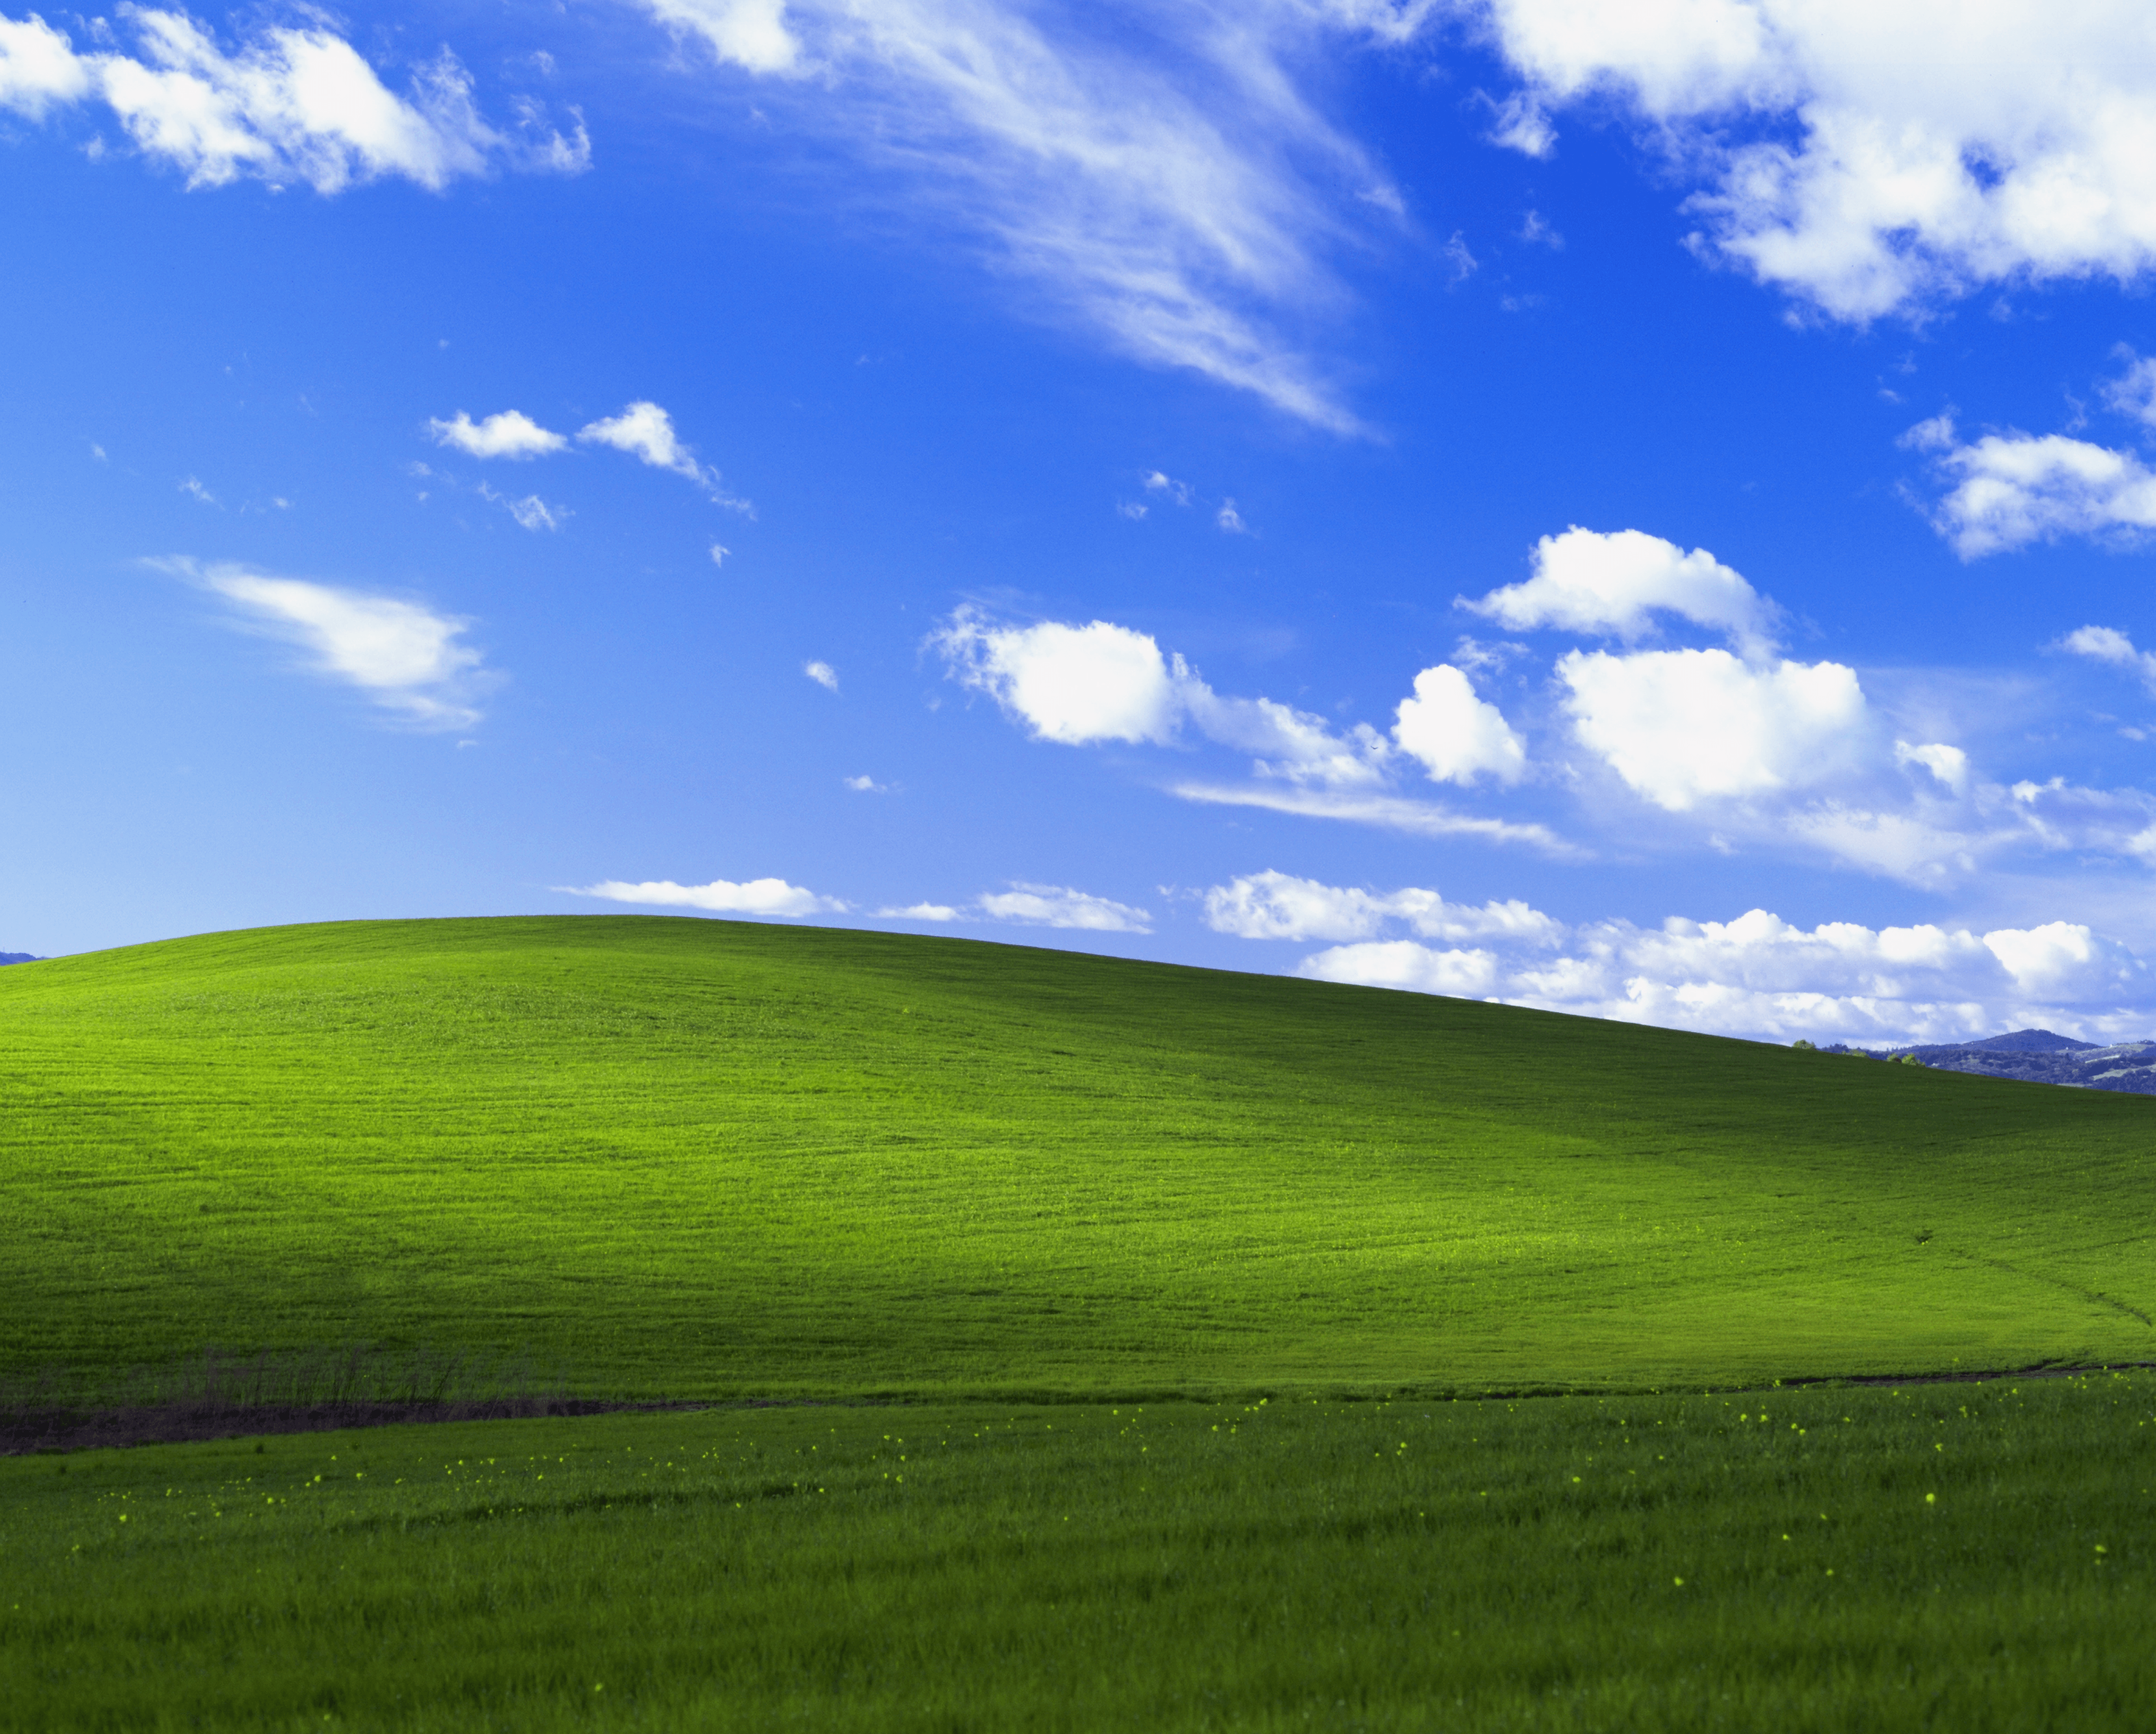 Here's the Windows XP wallpaper in glorious 4K res